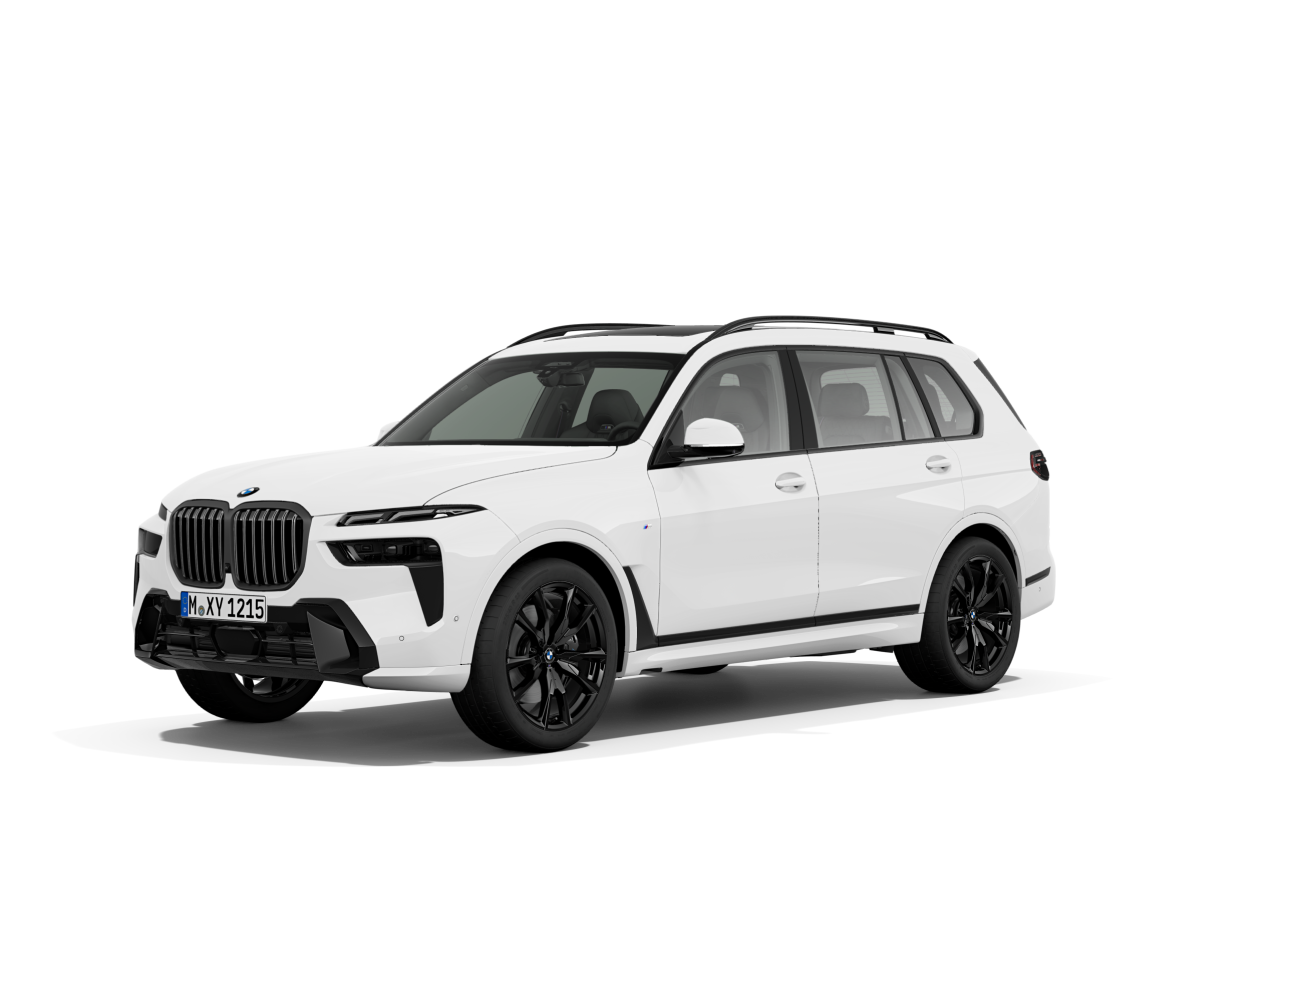 Bmw x7 xdrive40i 7 seater m sport edition front side